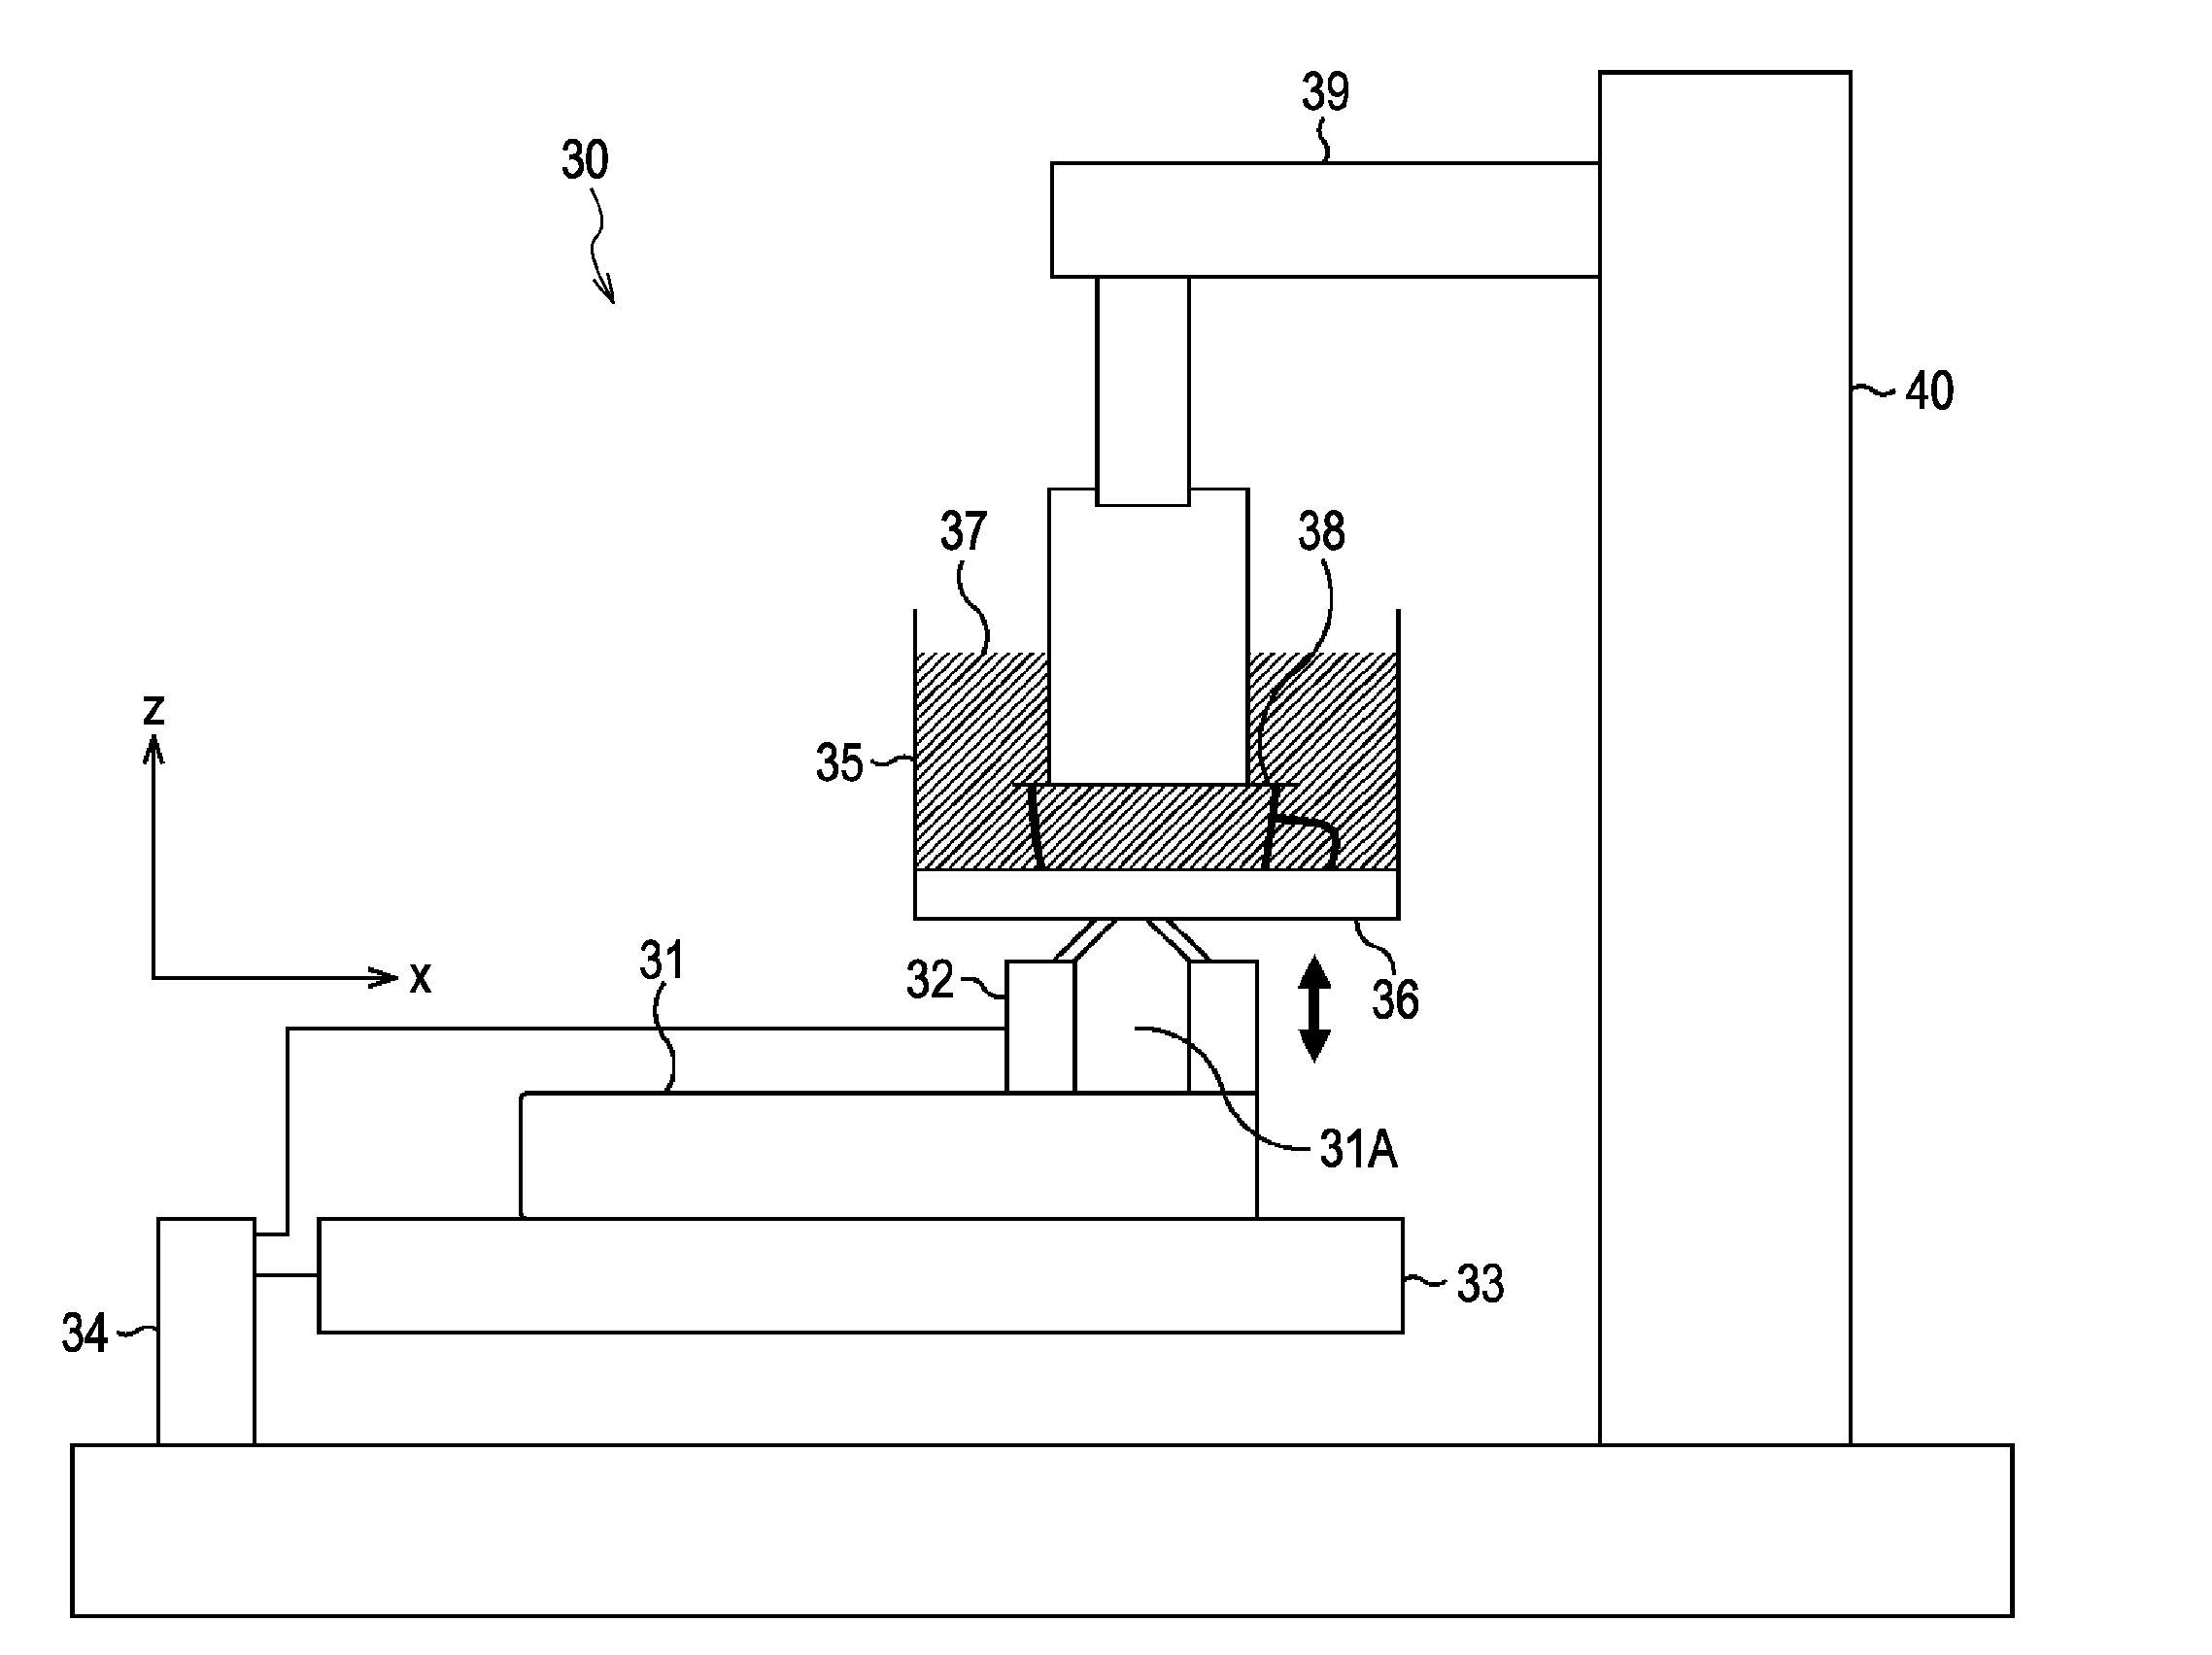 Stereolithography apparatus